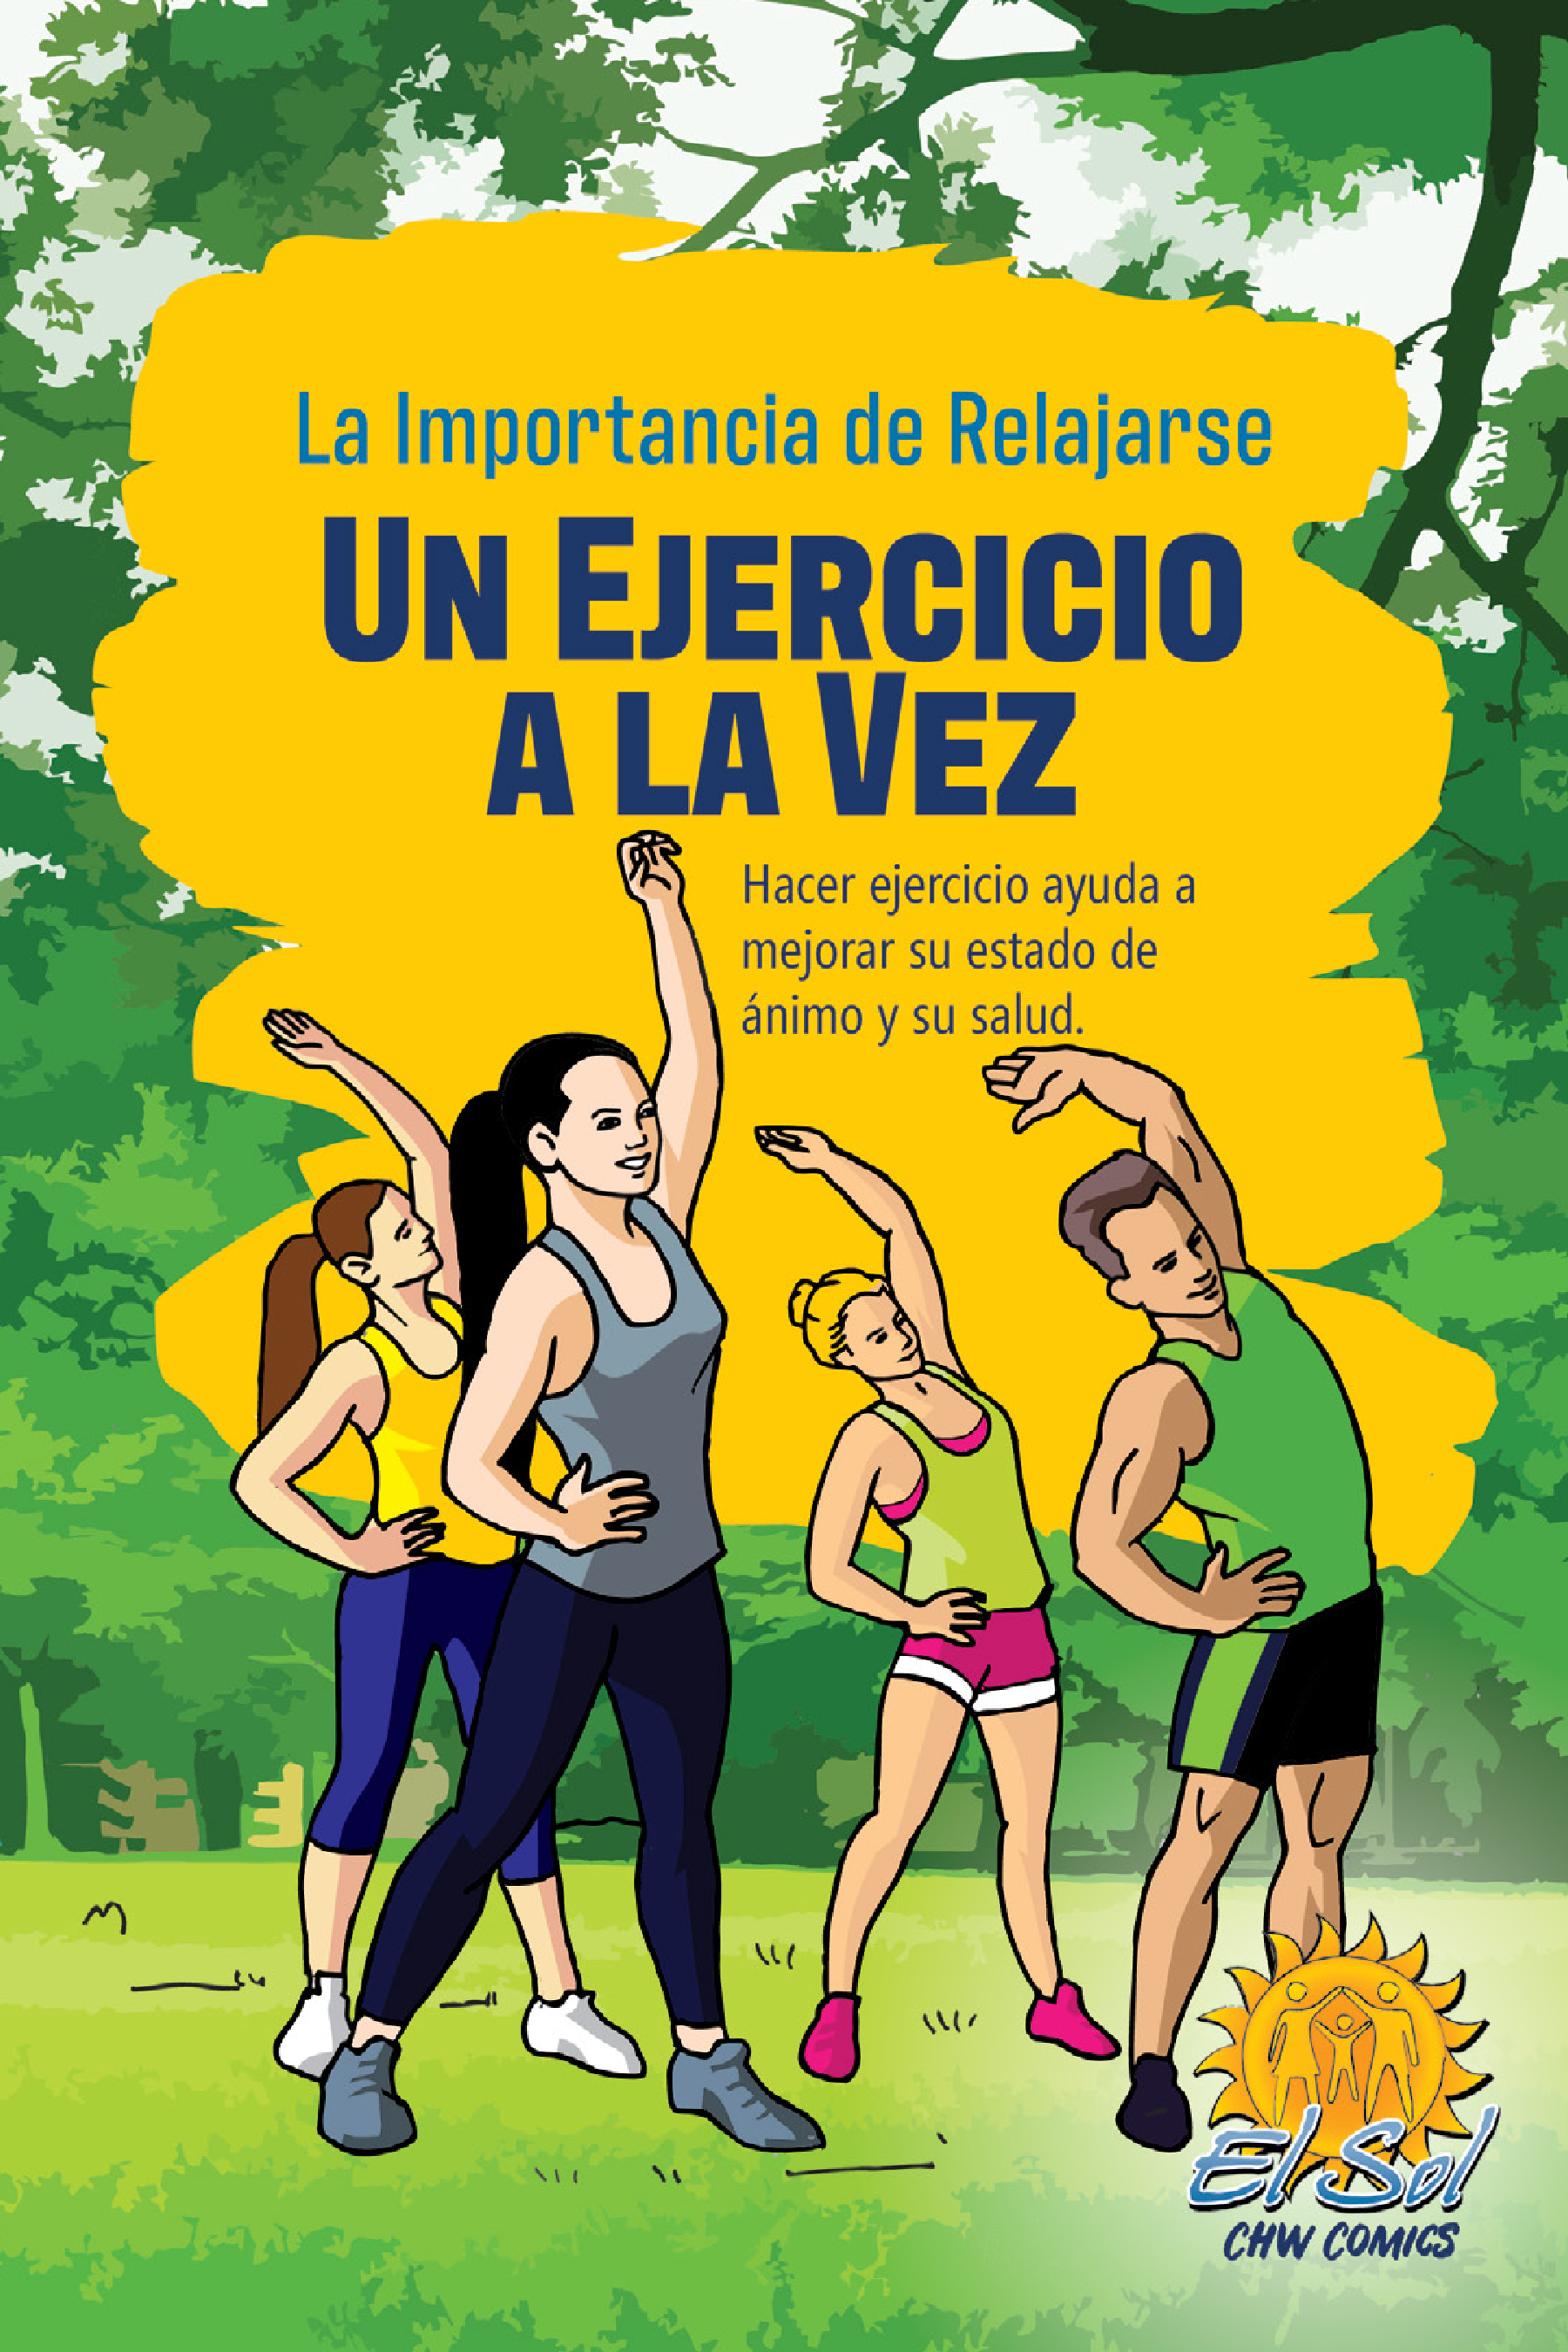 Title page reads in Spanish, "The Importance of Letting Go: One Exercise at a Time. Exercising helps boost your mood and improve your health." Images of cartoon people stretching in a park.